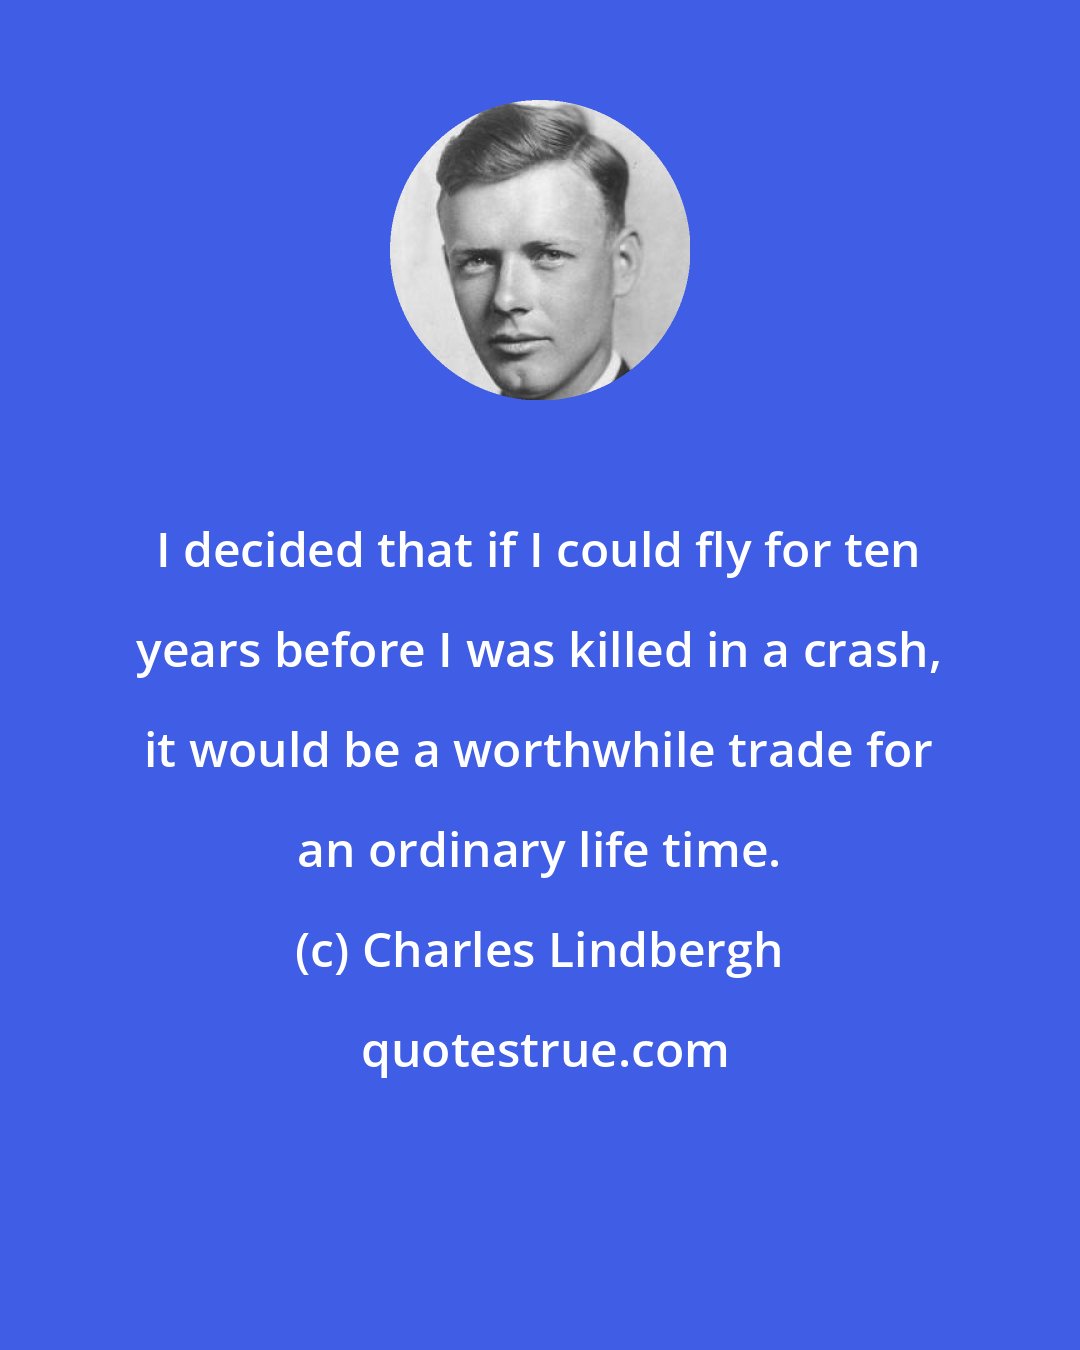 Charles Lindbergh: I decided that if I could fly for ten years before I was killed in a crash, it would be a worthwhile trade for an ordinary life time.